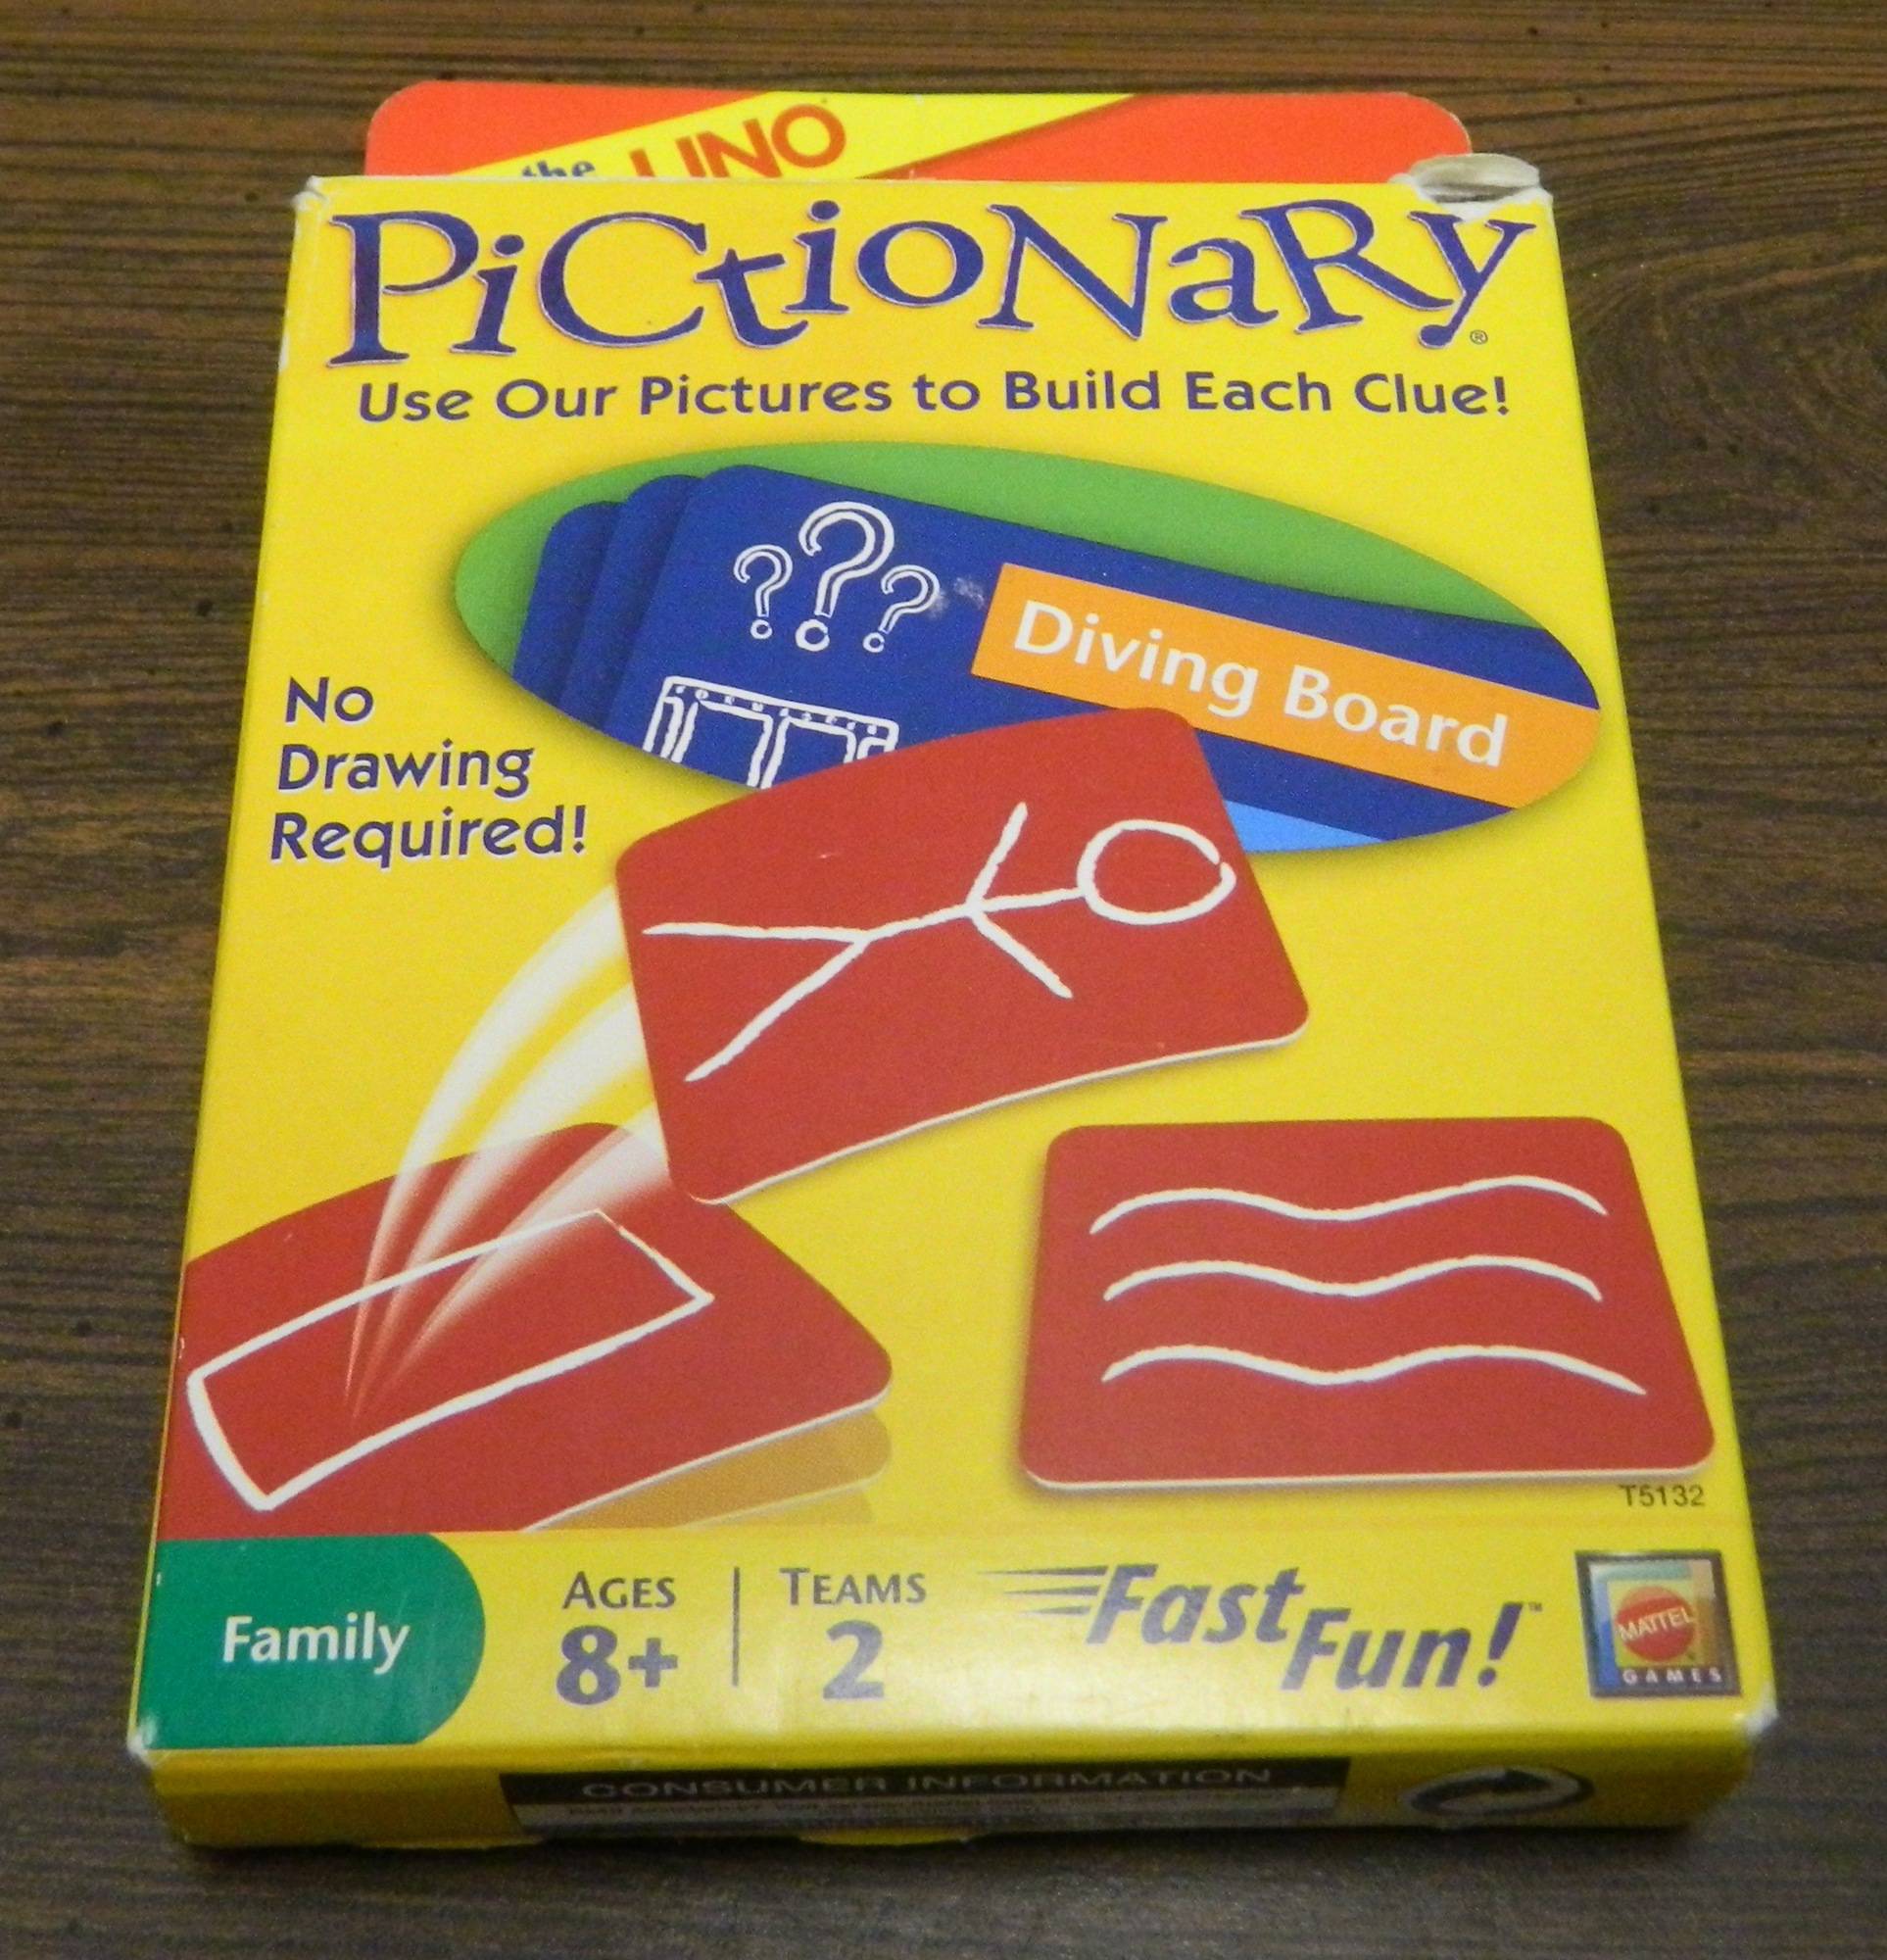 Pictionary Card Game Using Cards and Charades to Act Out Clues​ 